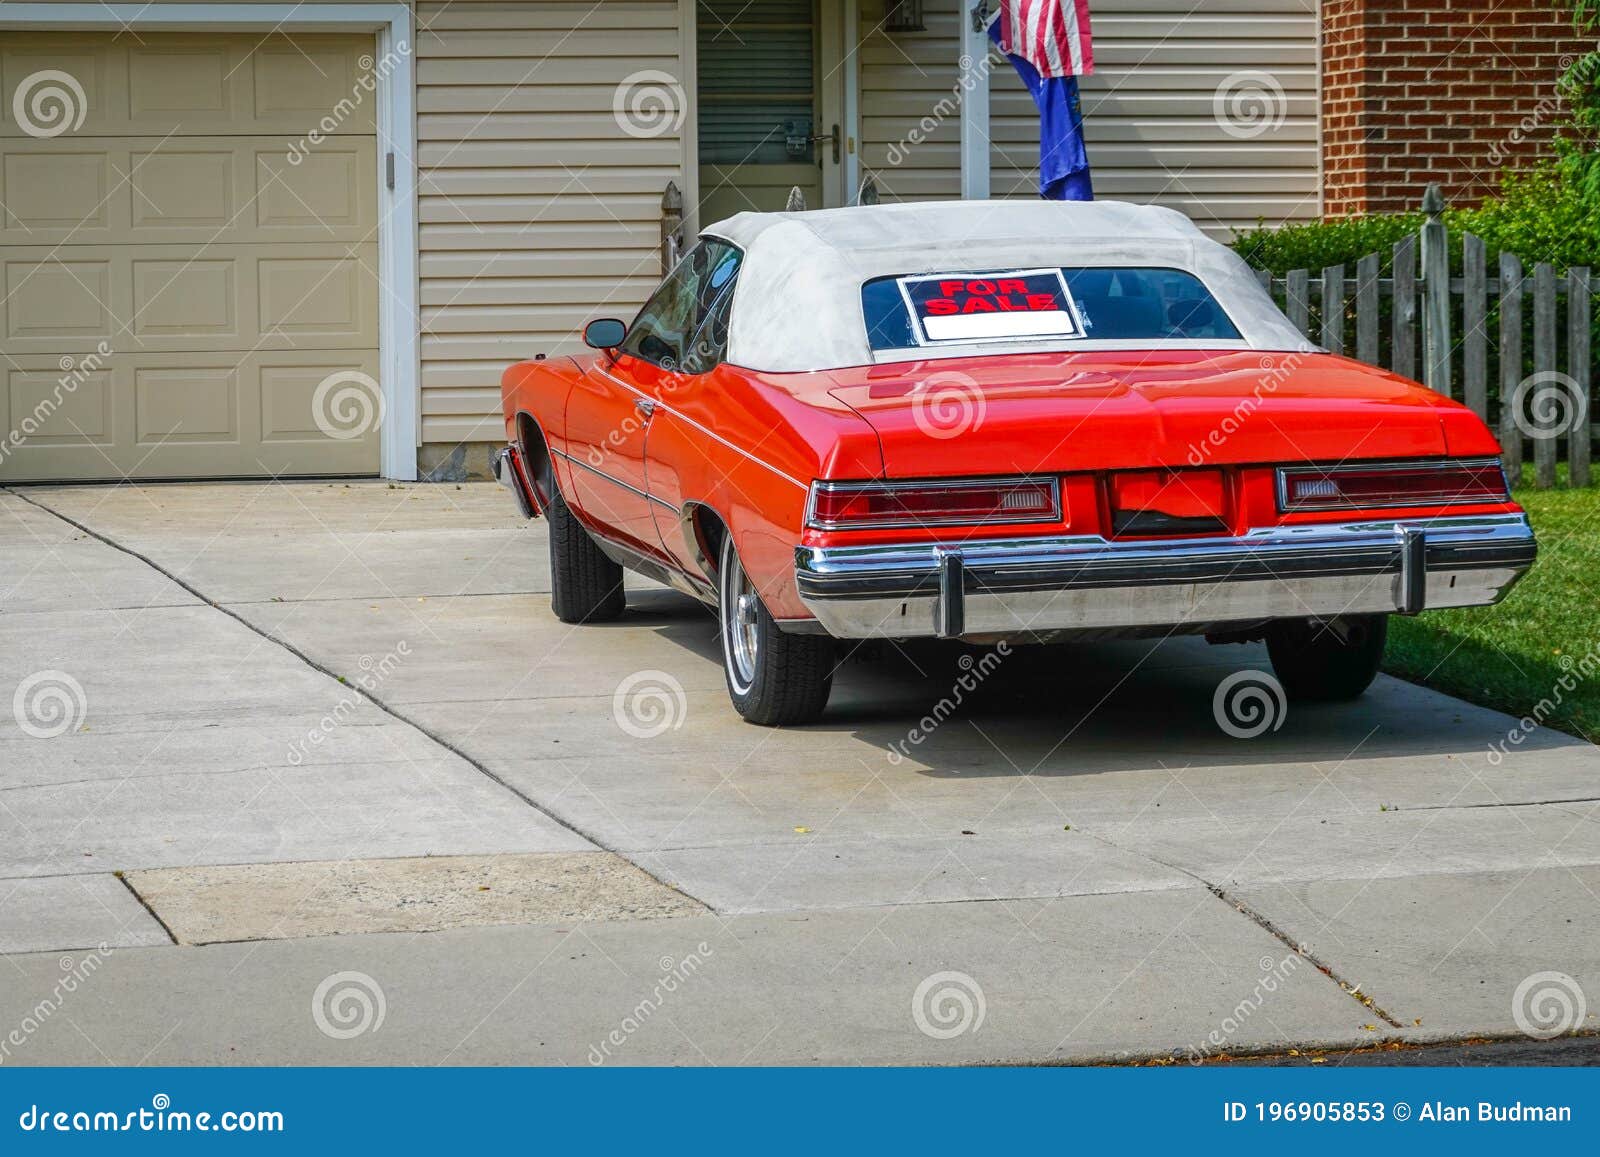 Red Old Historic Car Parked In A Driveway With A White Convertible Roof